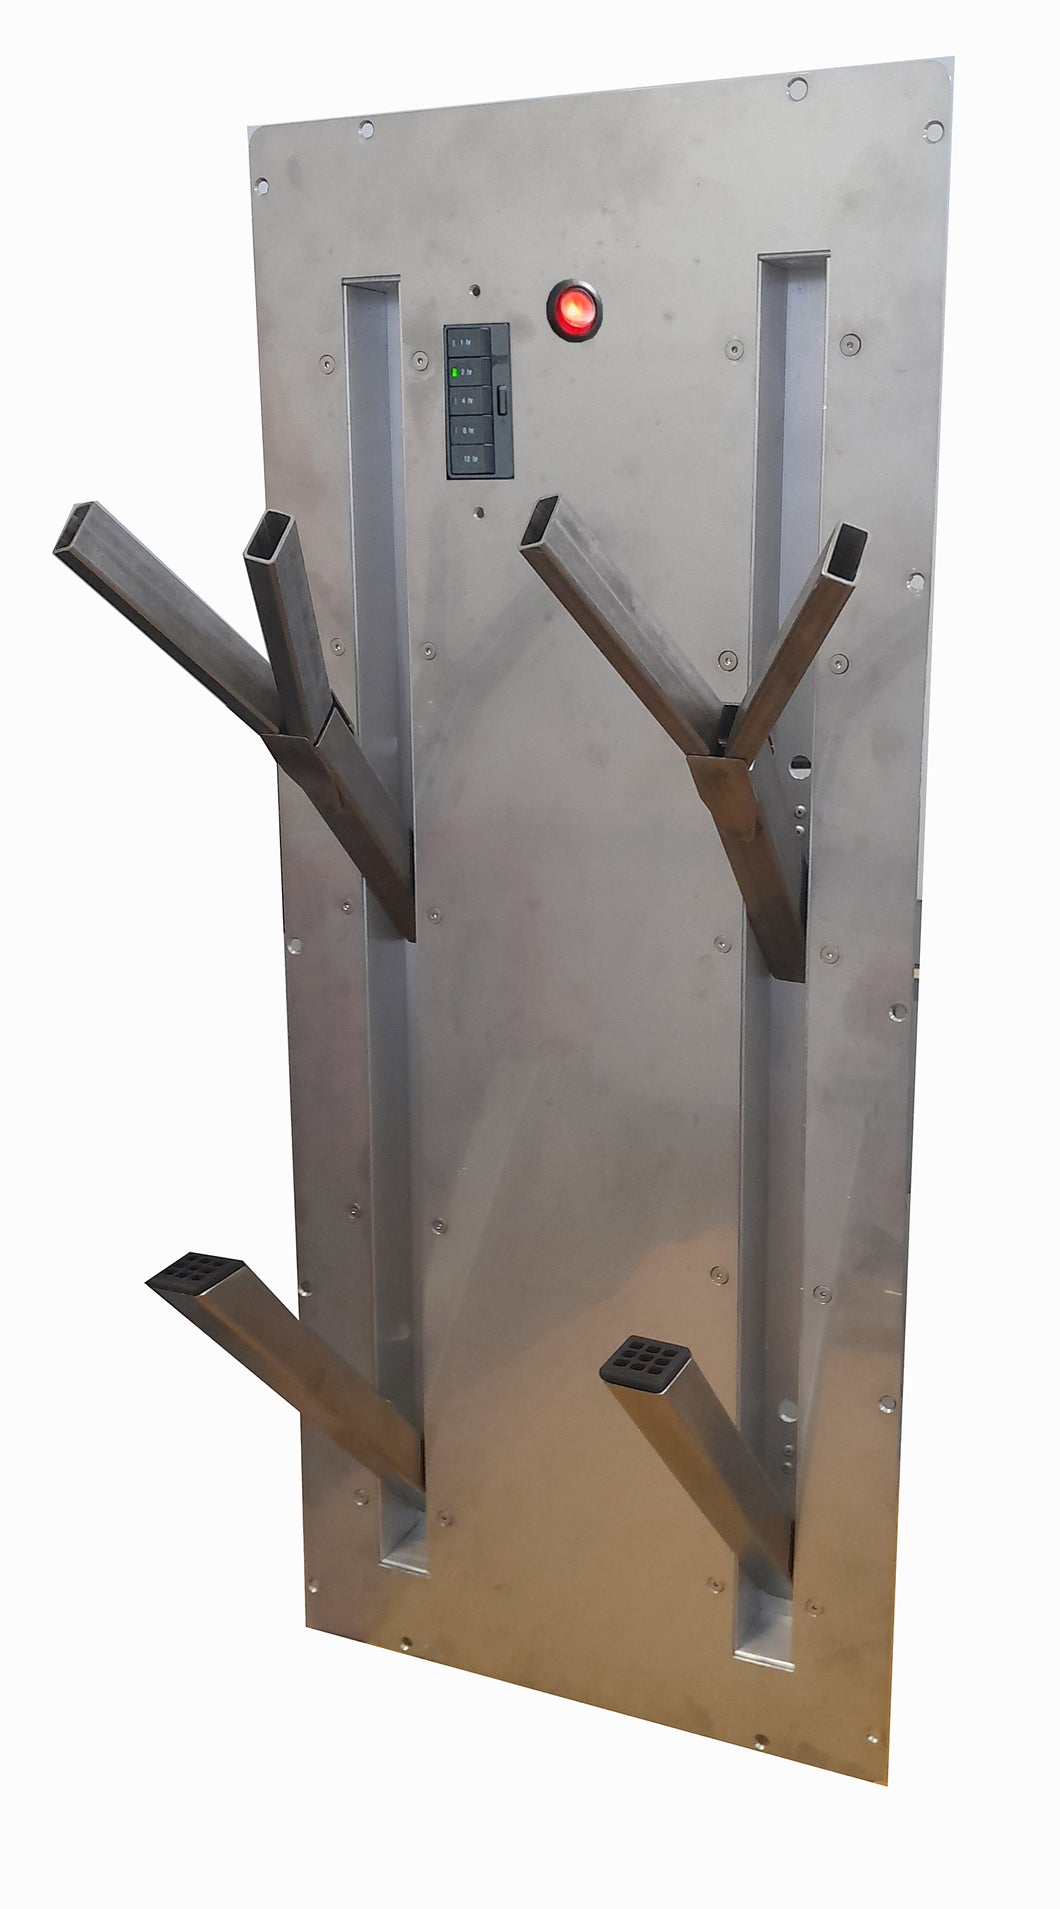 Ski boot dryer and glove dryer with spreading pegs for fast drying of gloves.  For installation in mudroom lockers or ski boot room.  High quality space saving design made of stainless steel. 